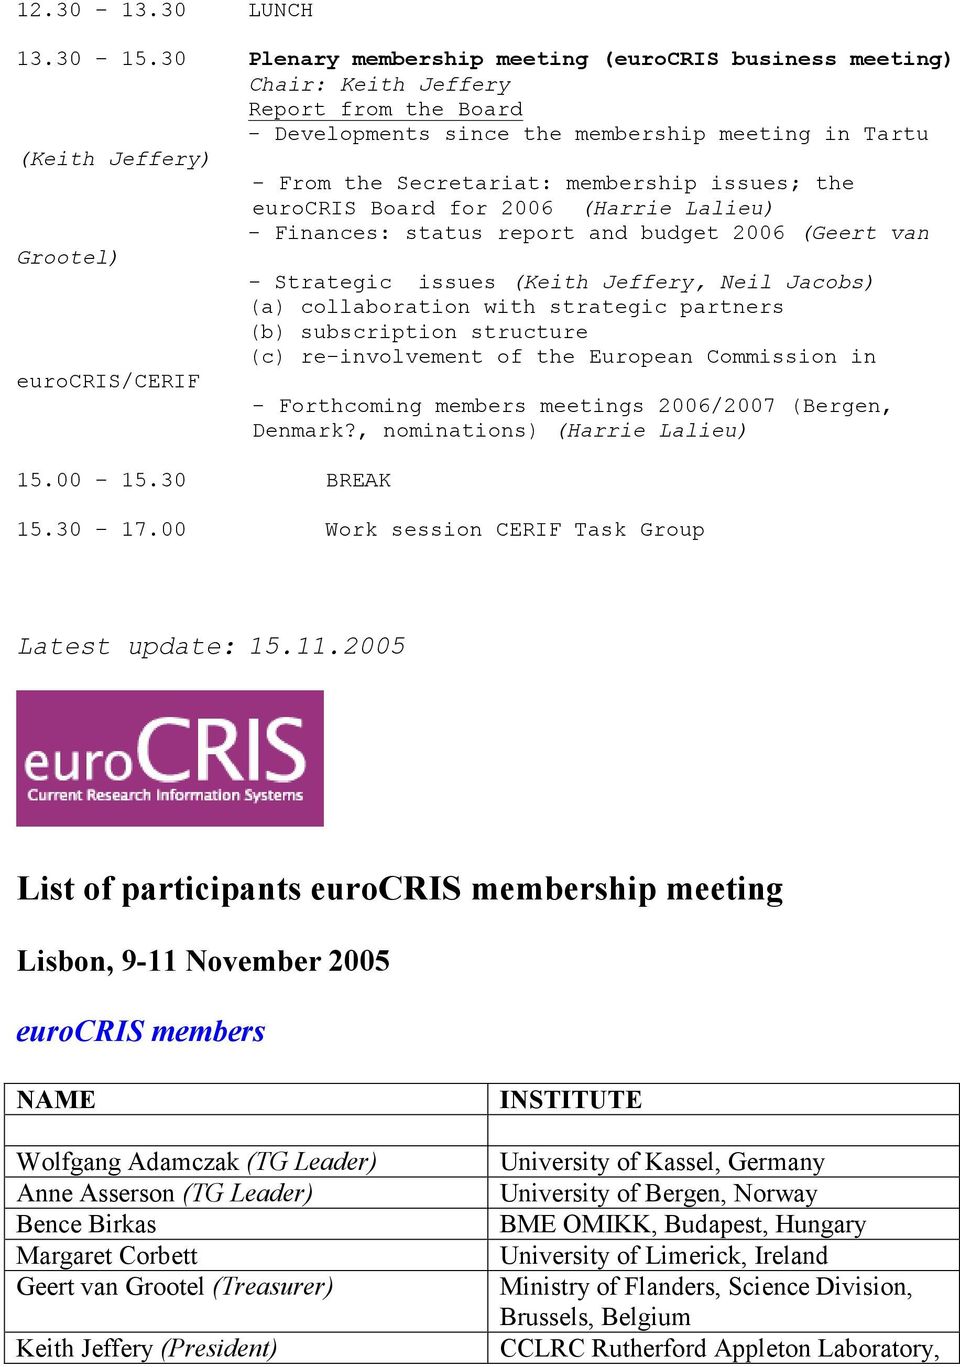 membership issues; the eurocris Board for 2006 (Harrie Lalieu) - Finances: status report and budget 2006 (Geert van Grootel) - Strategic issues (Keith Jeffery, Neil Jacobs) (a) collaboration with